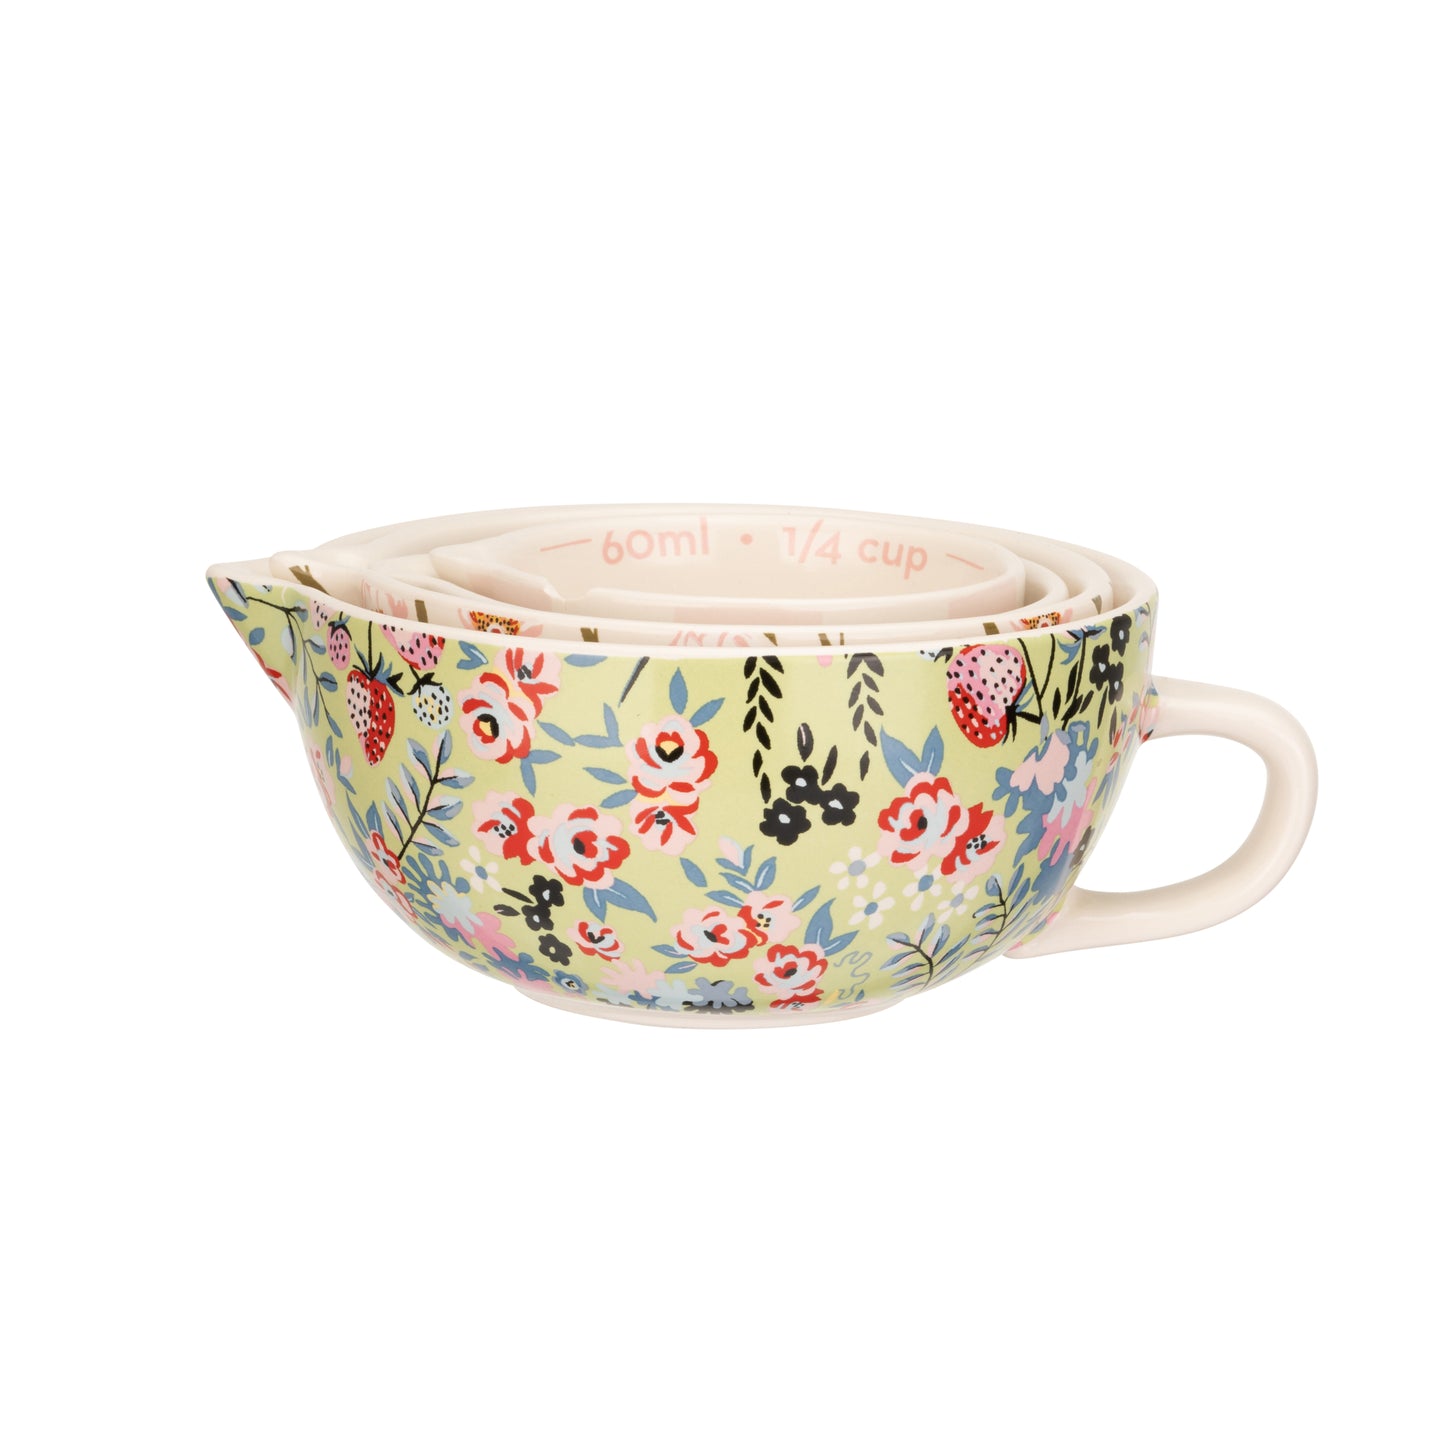 Cath Kidston Painted Table Ceramic Measuring Cups Set